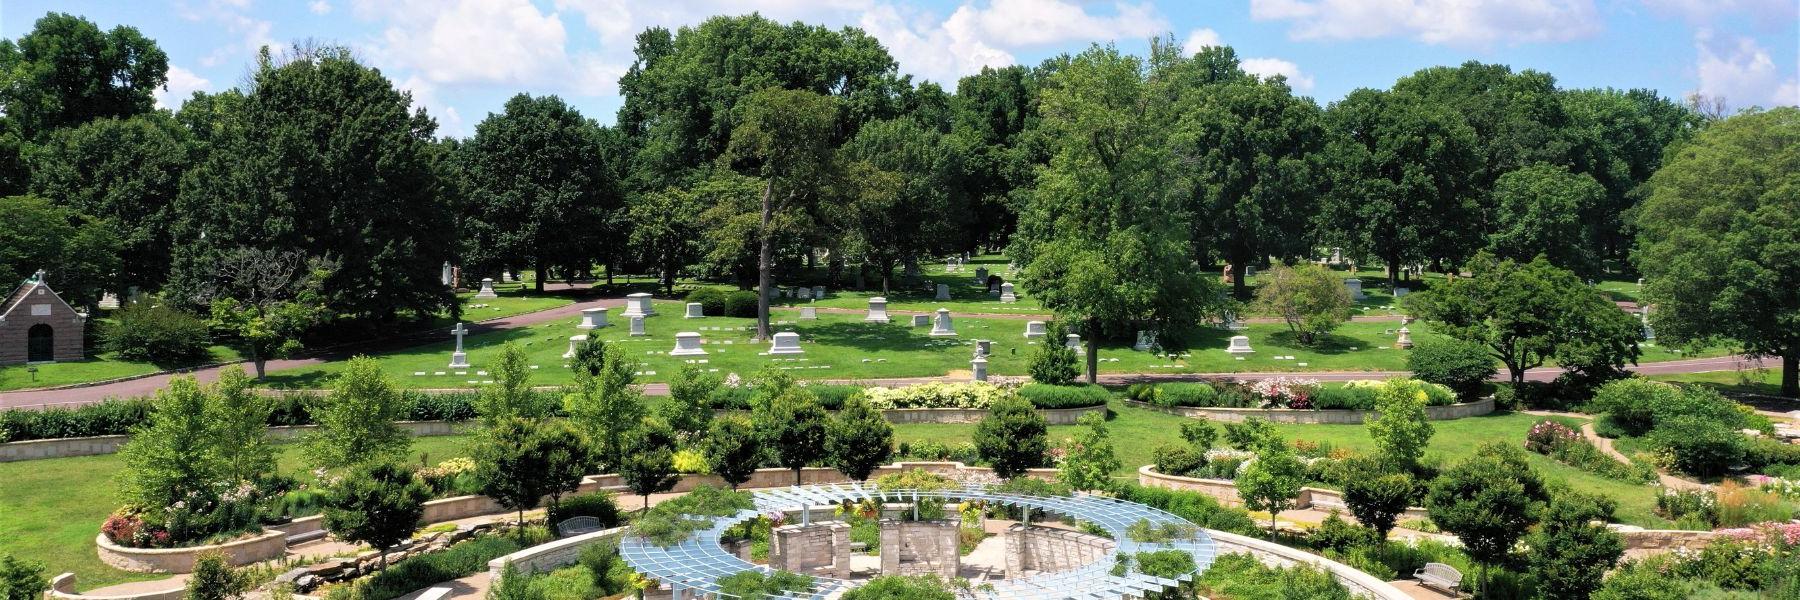 Bellefontaine Cemetery and Arboretum in St. Louis is a great place to take a walk.